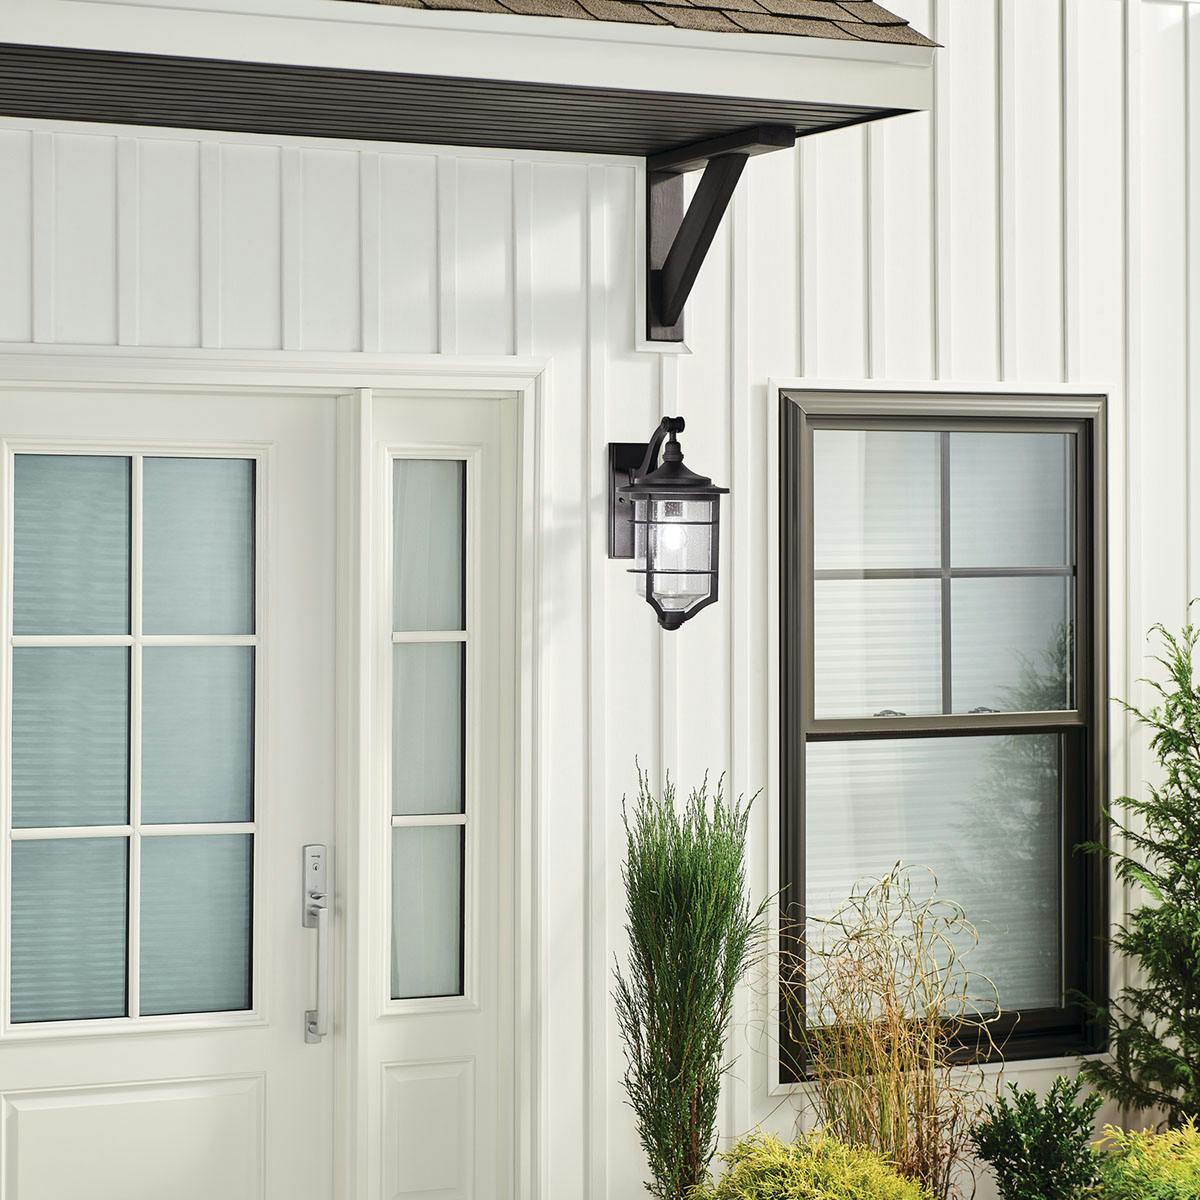 Day time Exterior image featuring Royal Marine outdoor wall light 49127DBK